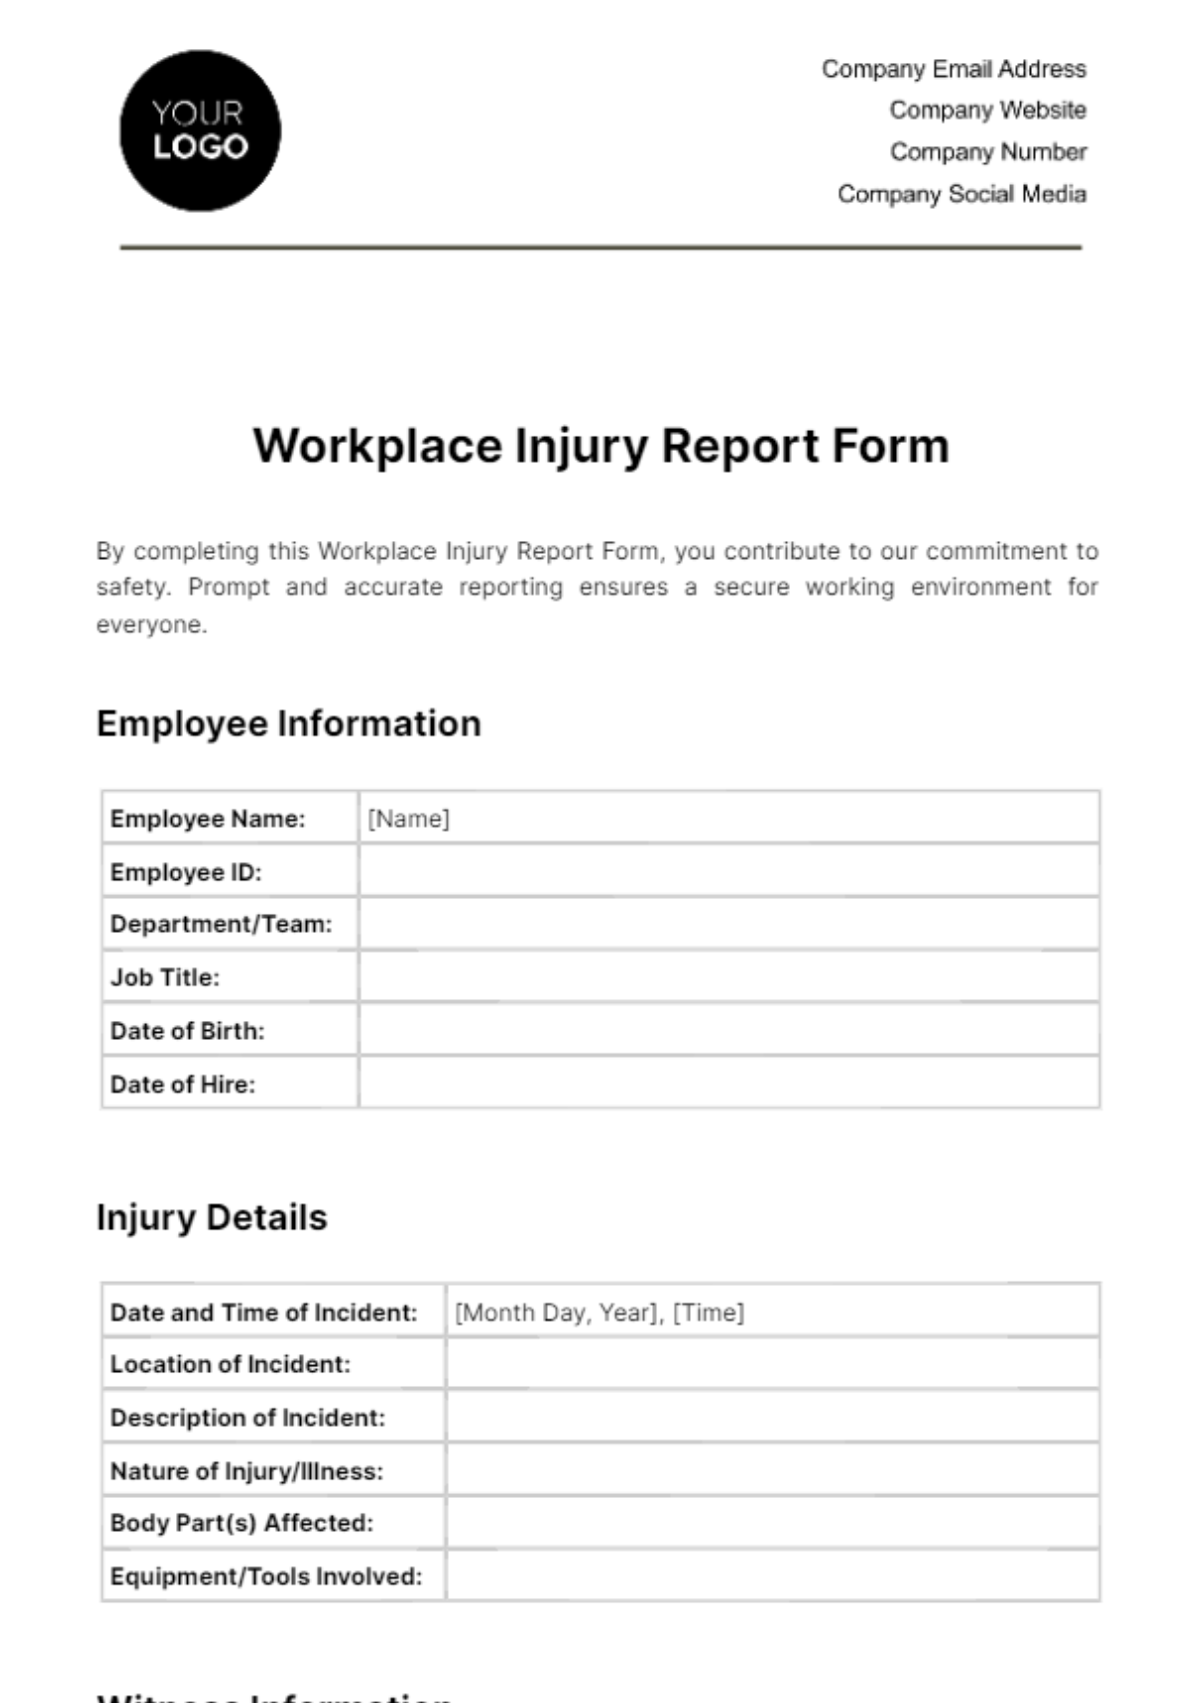 Workplace Injury Report Form Template